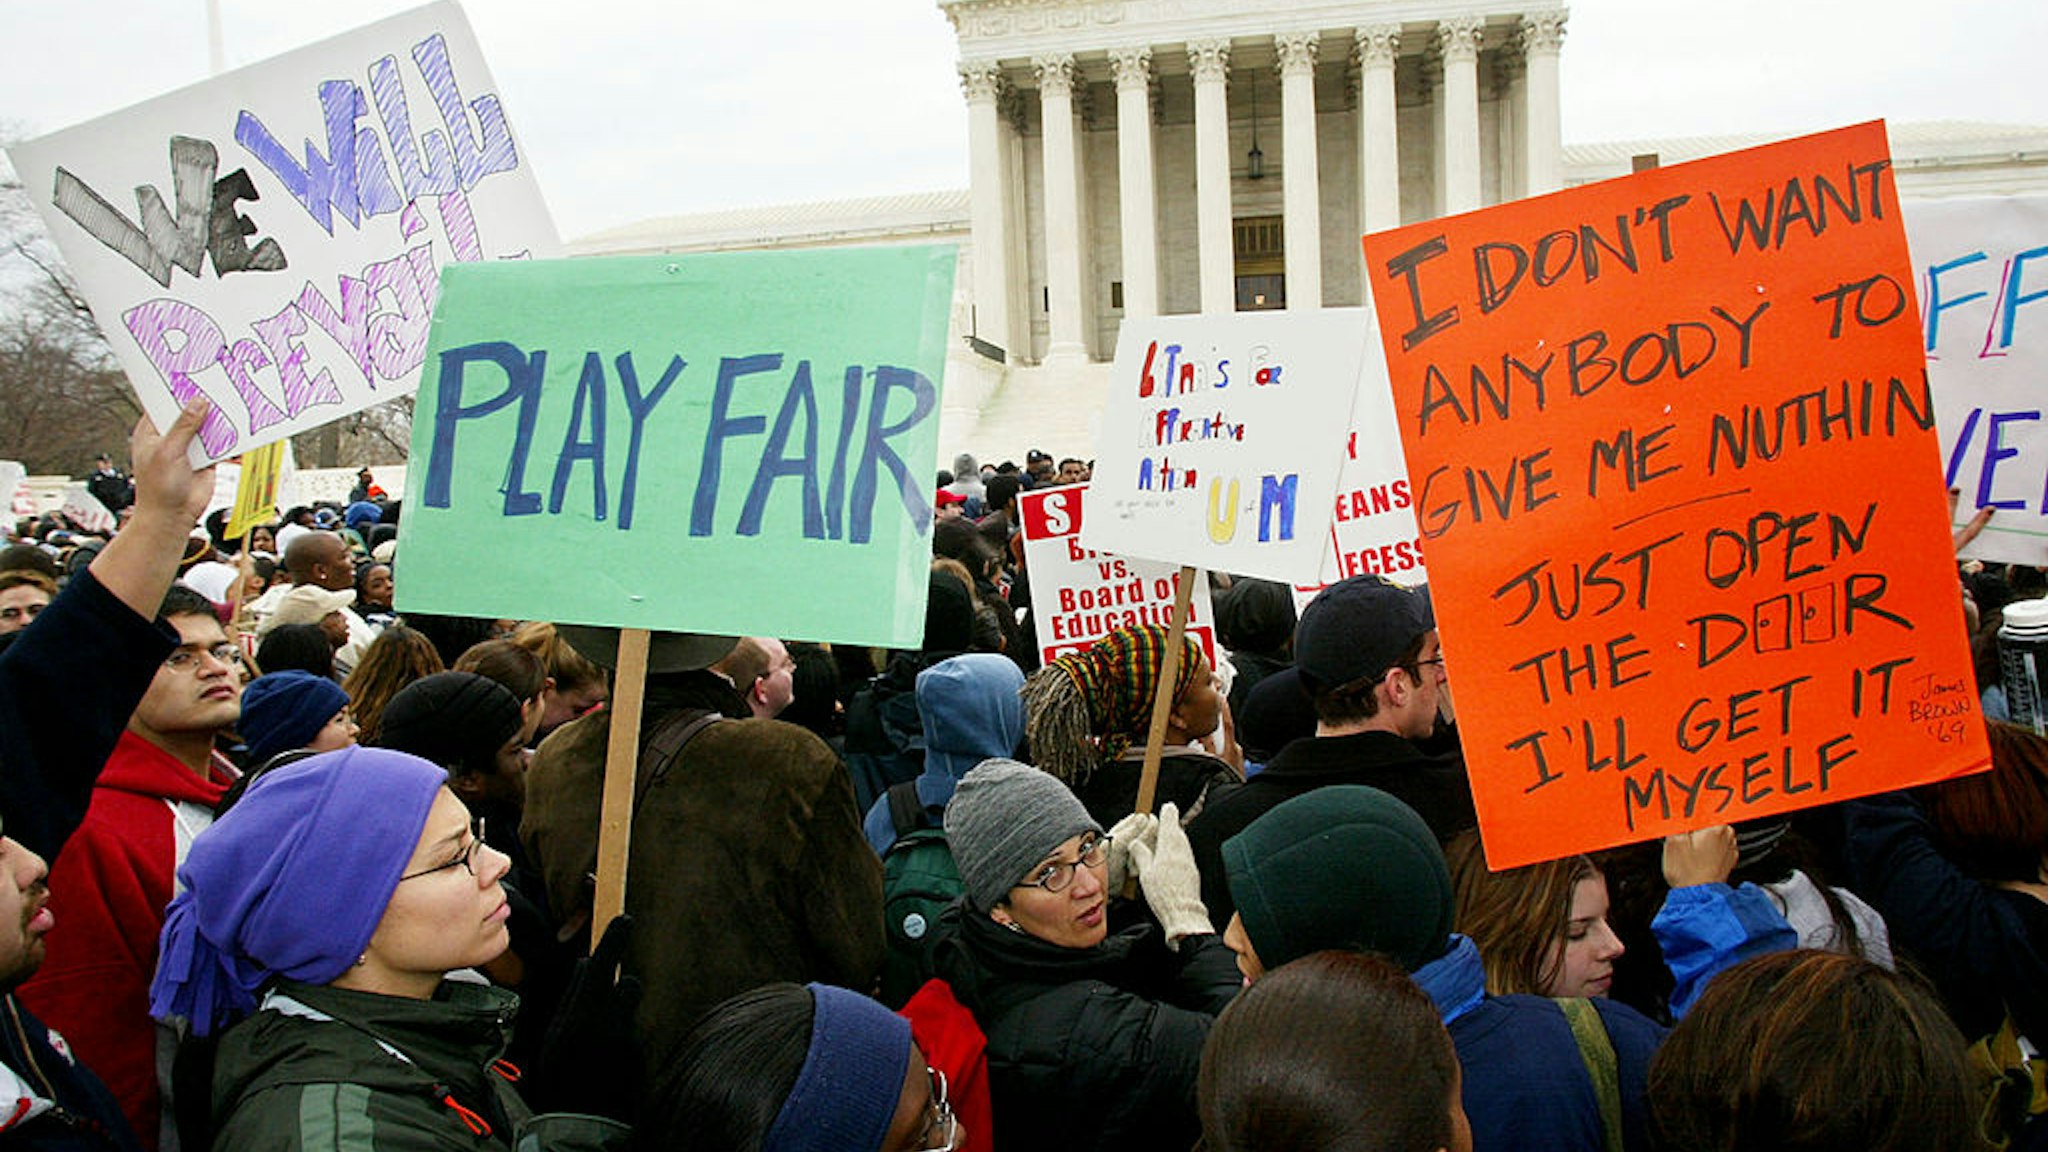 WASHINGTON - APRIL 1: Affirmative action supporters rally outside the U.S. Supreme Court April 1, 2003 in Washington, DC. The Supreme Court heard oral arguments in the University of Michigan affirmative action cases to see if the school can consider race in the undergraduate and law school admissions. (Photo by Alex Wong/Getty Images)